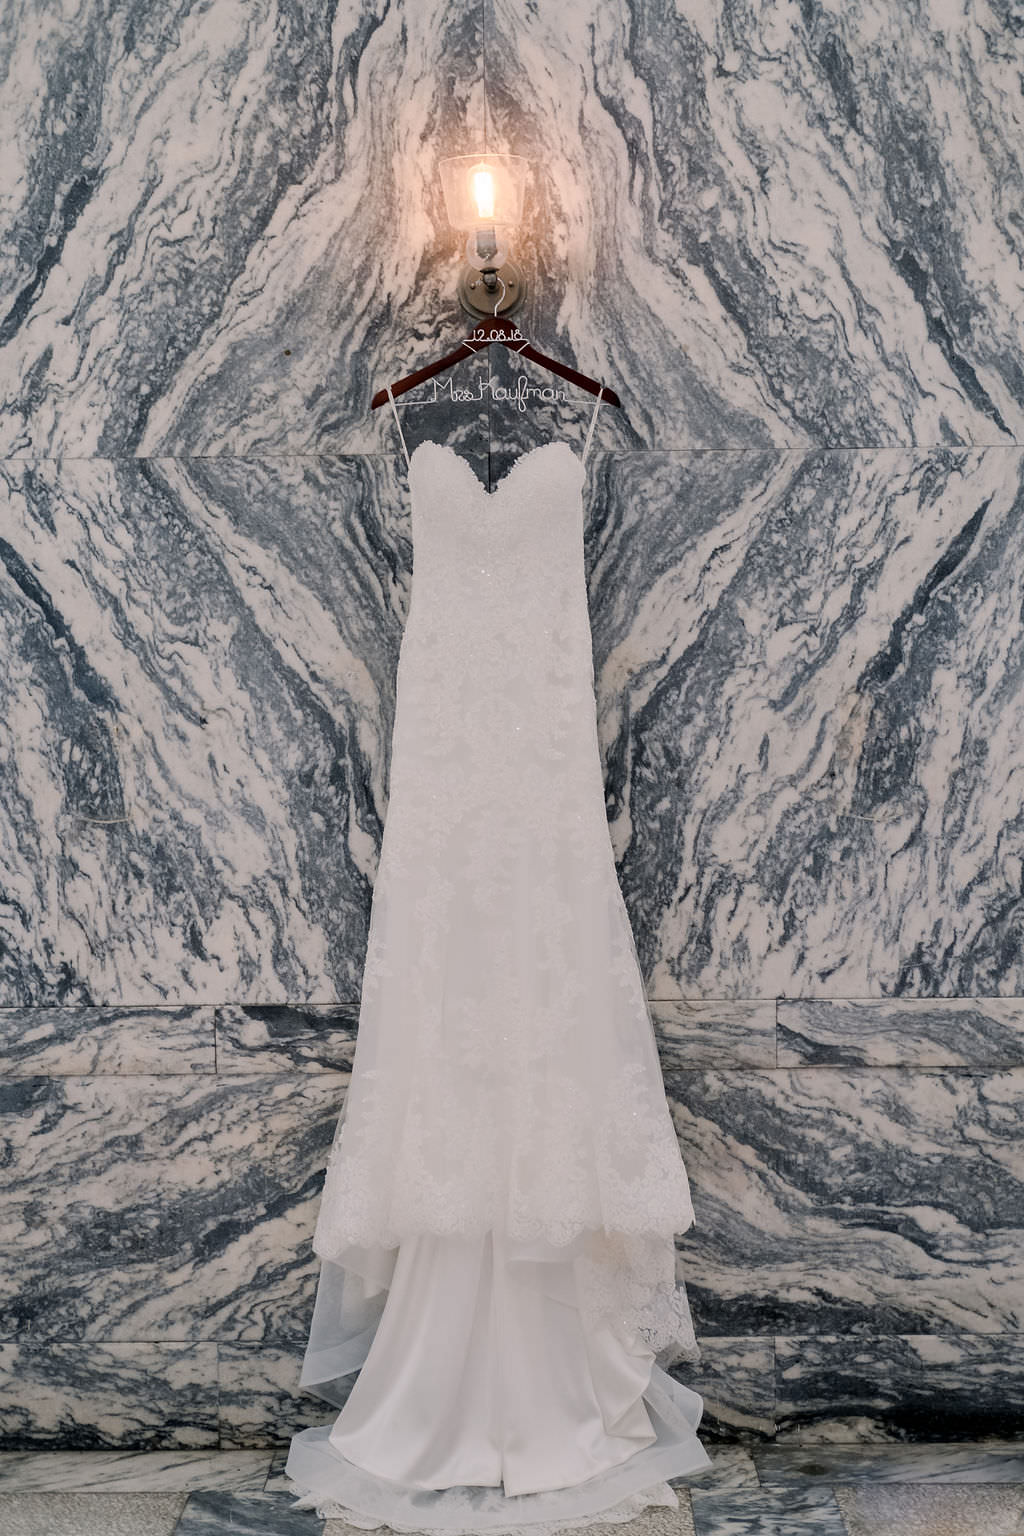 Strapless Sweetheart Lace Fitted Maggie Sottero Wedding Dress on Custom Hanger and Marble Wall Backdrop